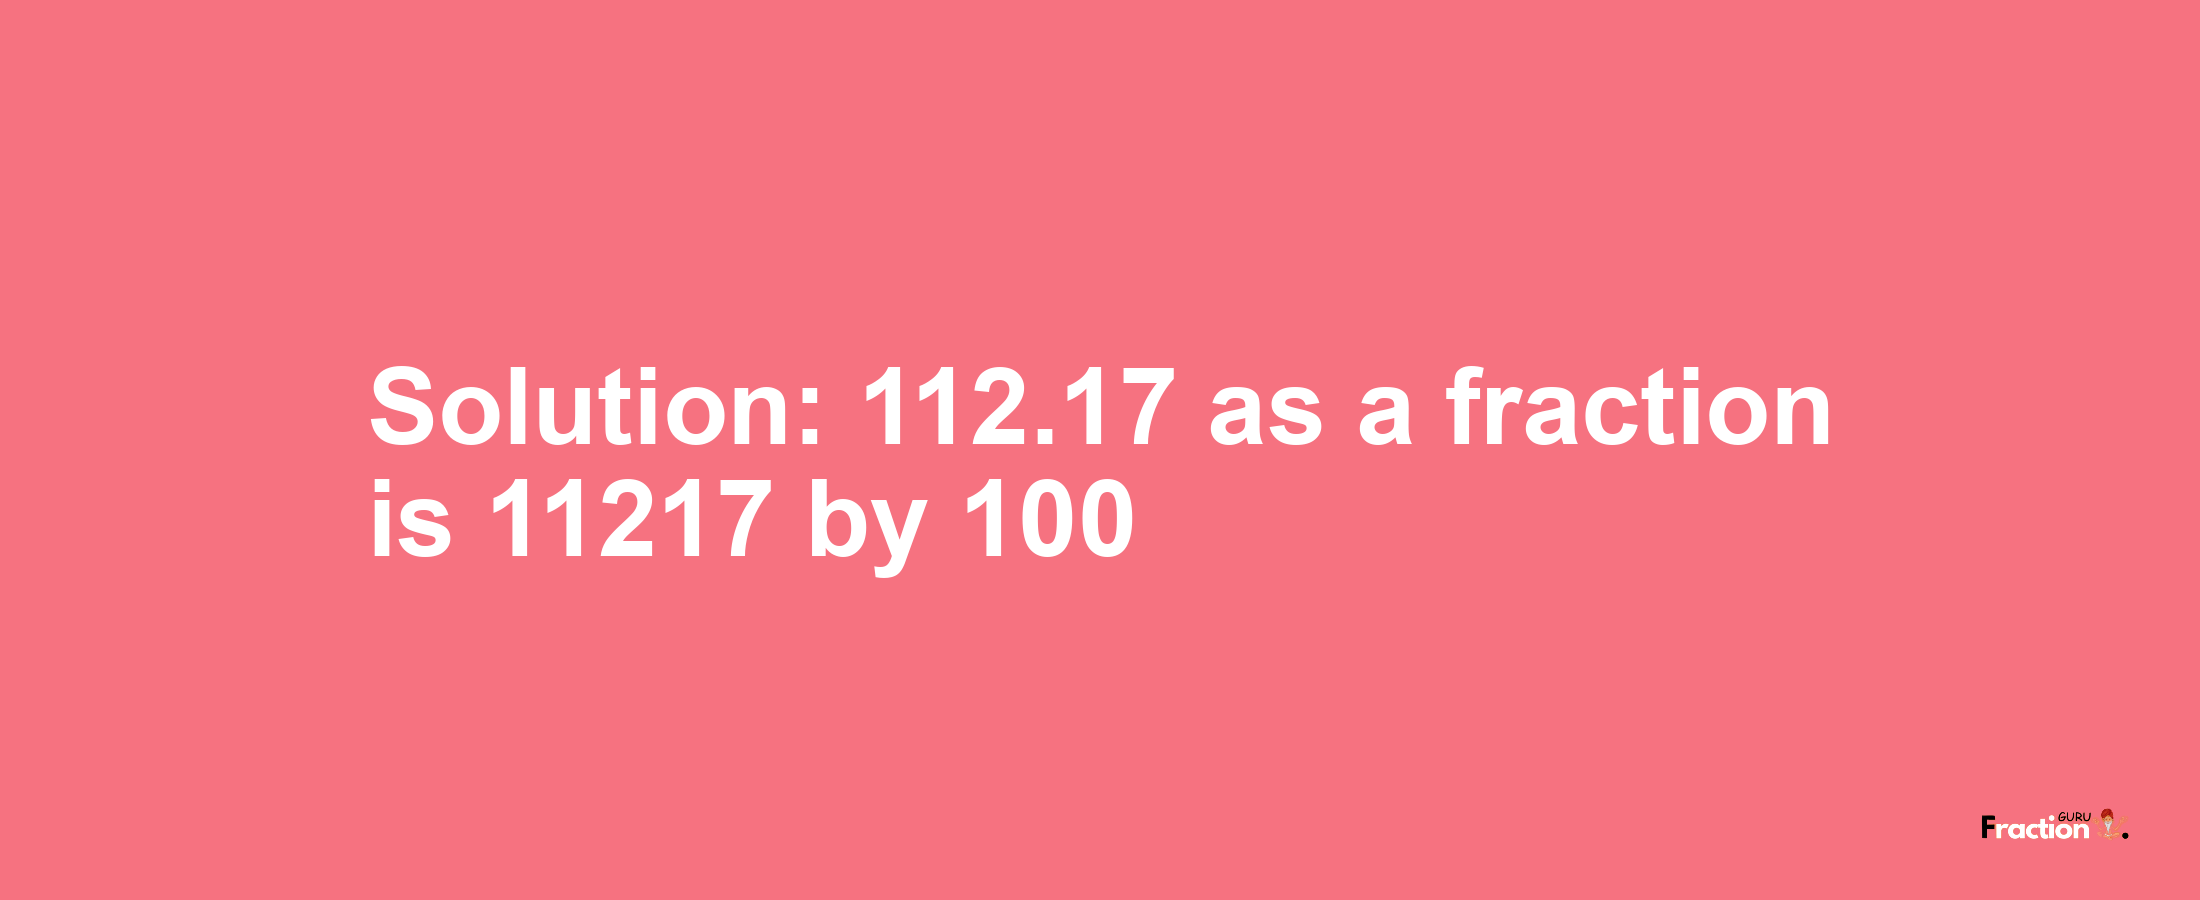 Solution:112.17 as a fraction is 11217/100